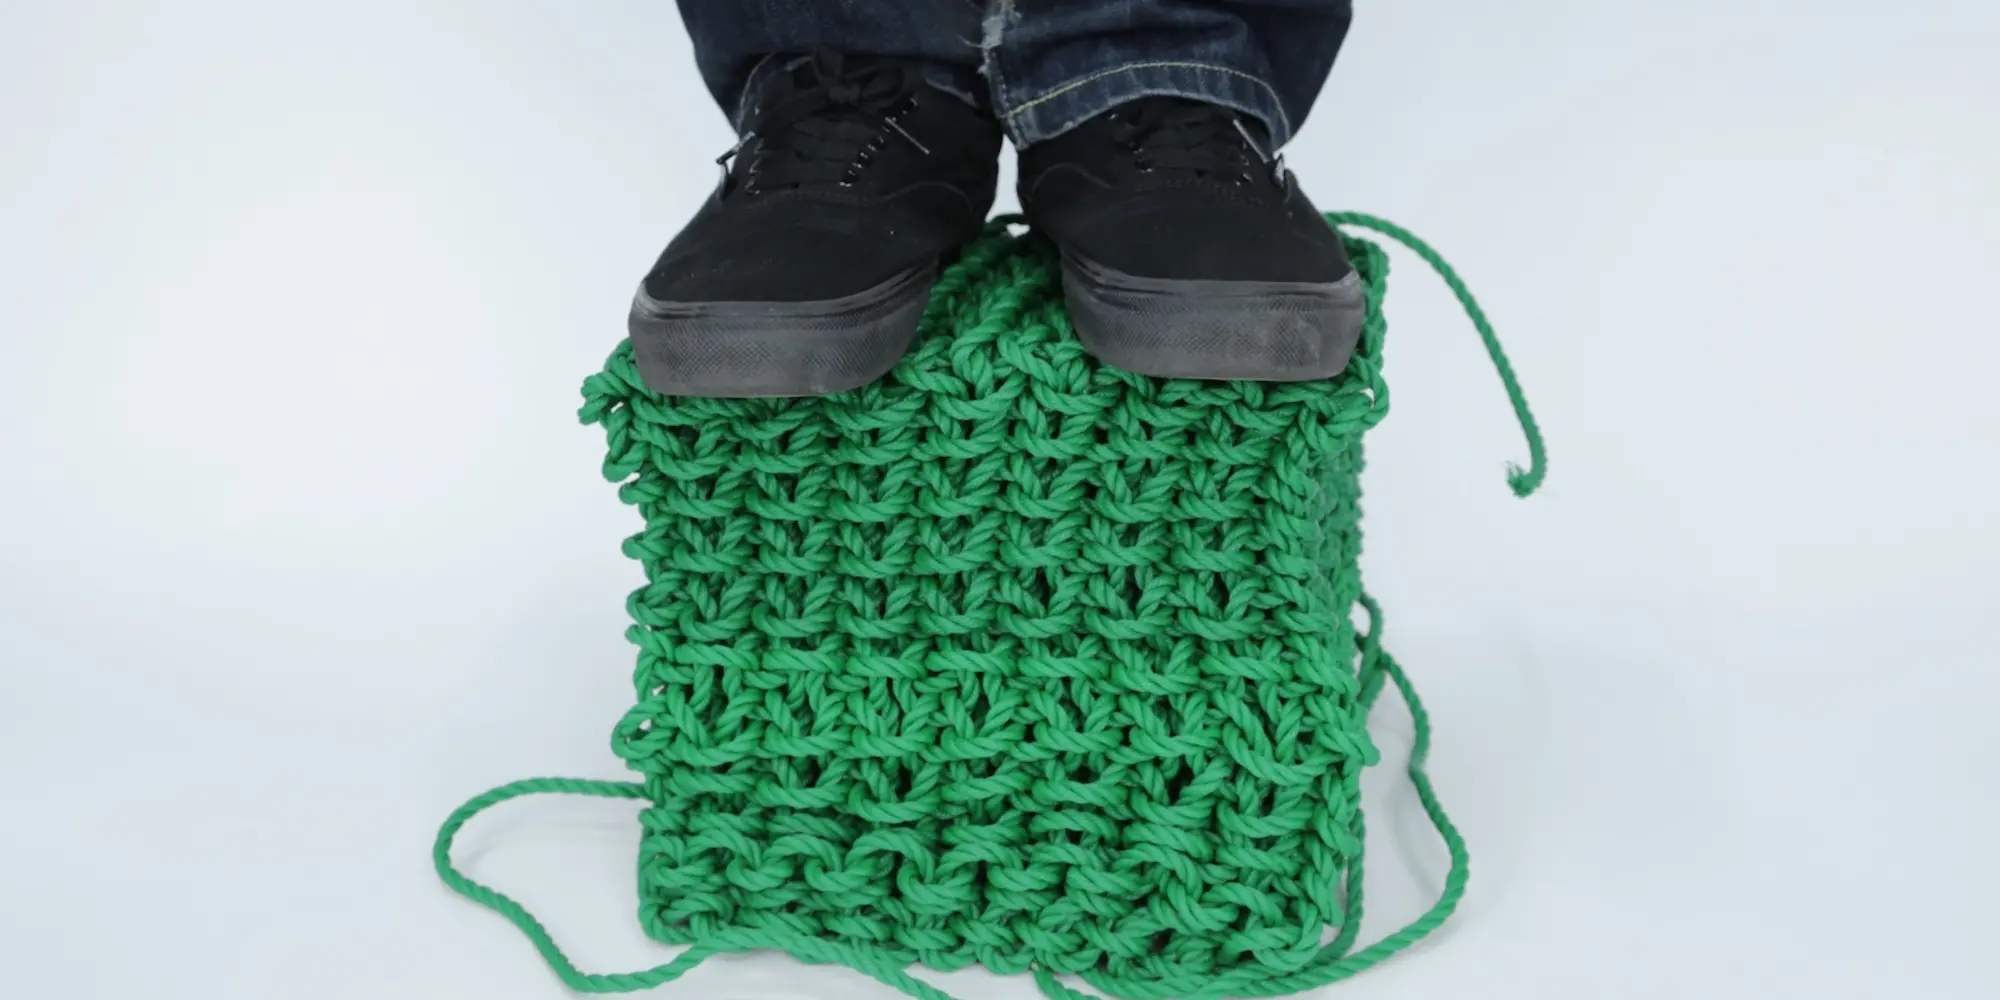 A person stands on a knitted cube made with a new fabrication technique.